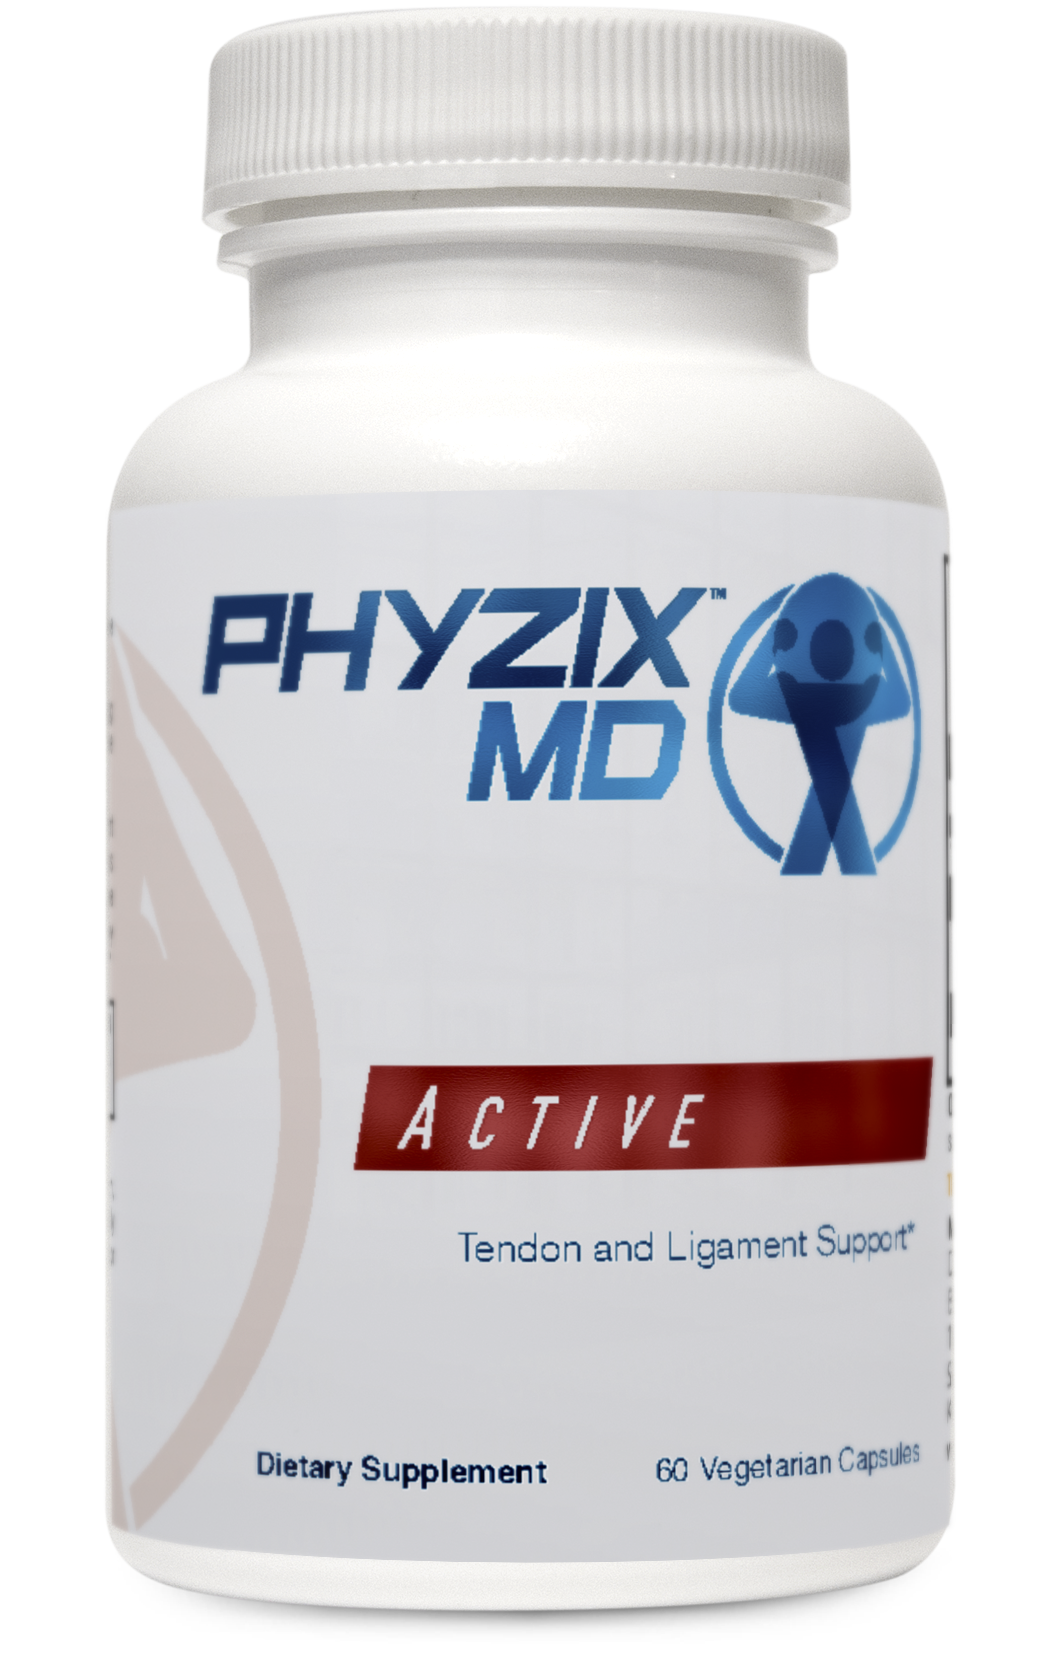 Active is another Phyzix MD product to help support healthy joints! 